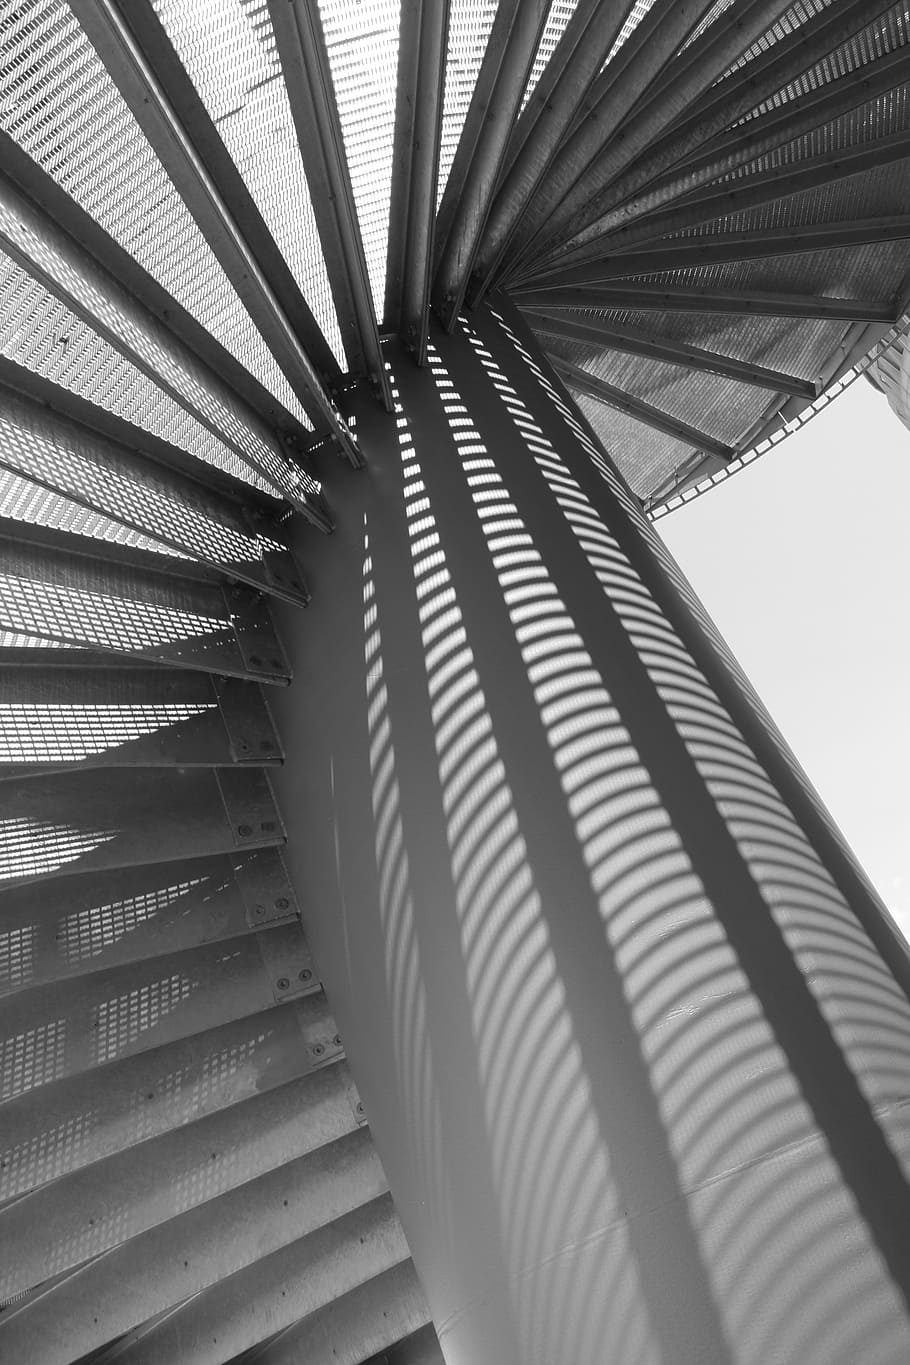 stairs, spiral staircase, light, shadow, grid, shadow play, pattern, architecture, built structure, low angle view